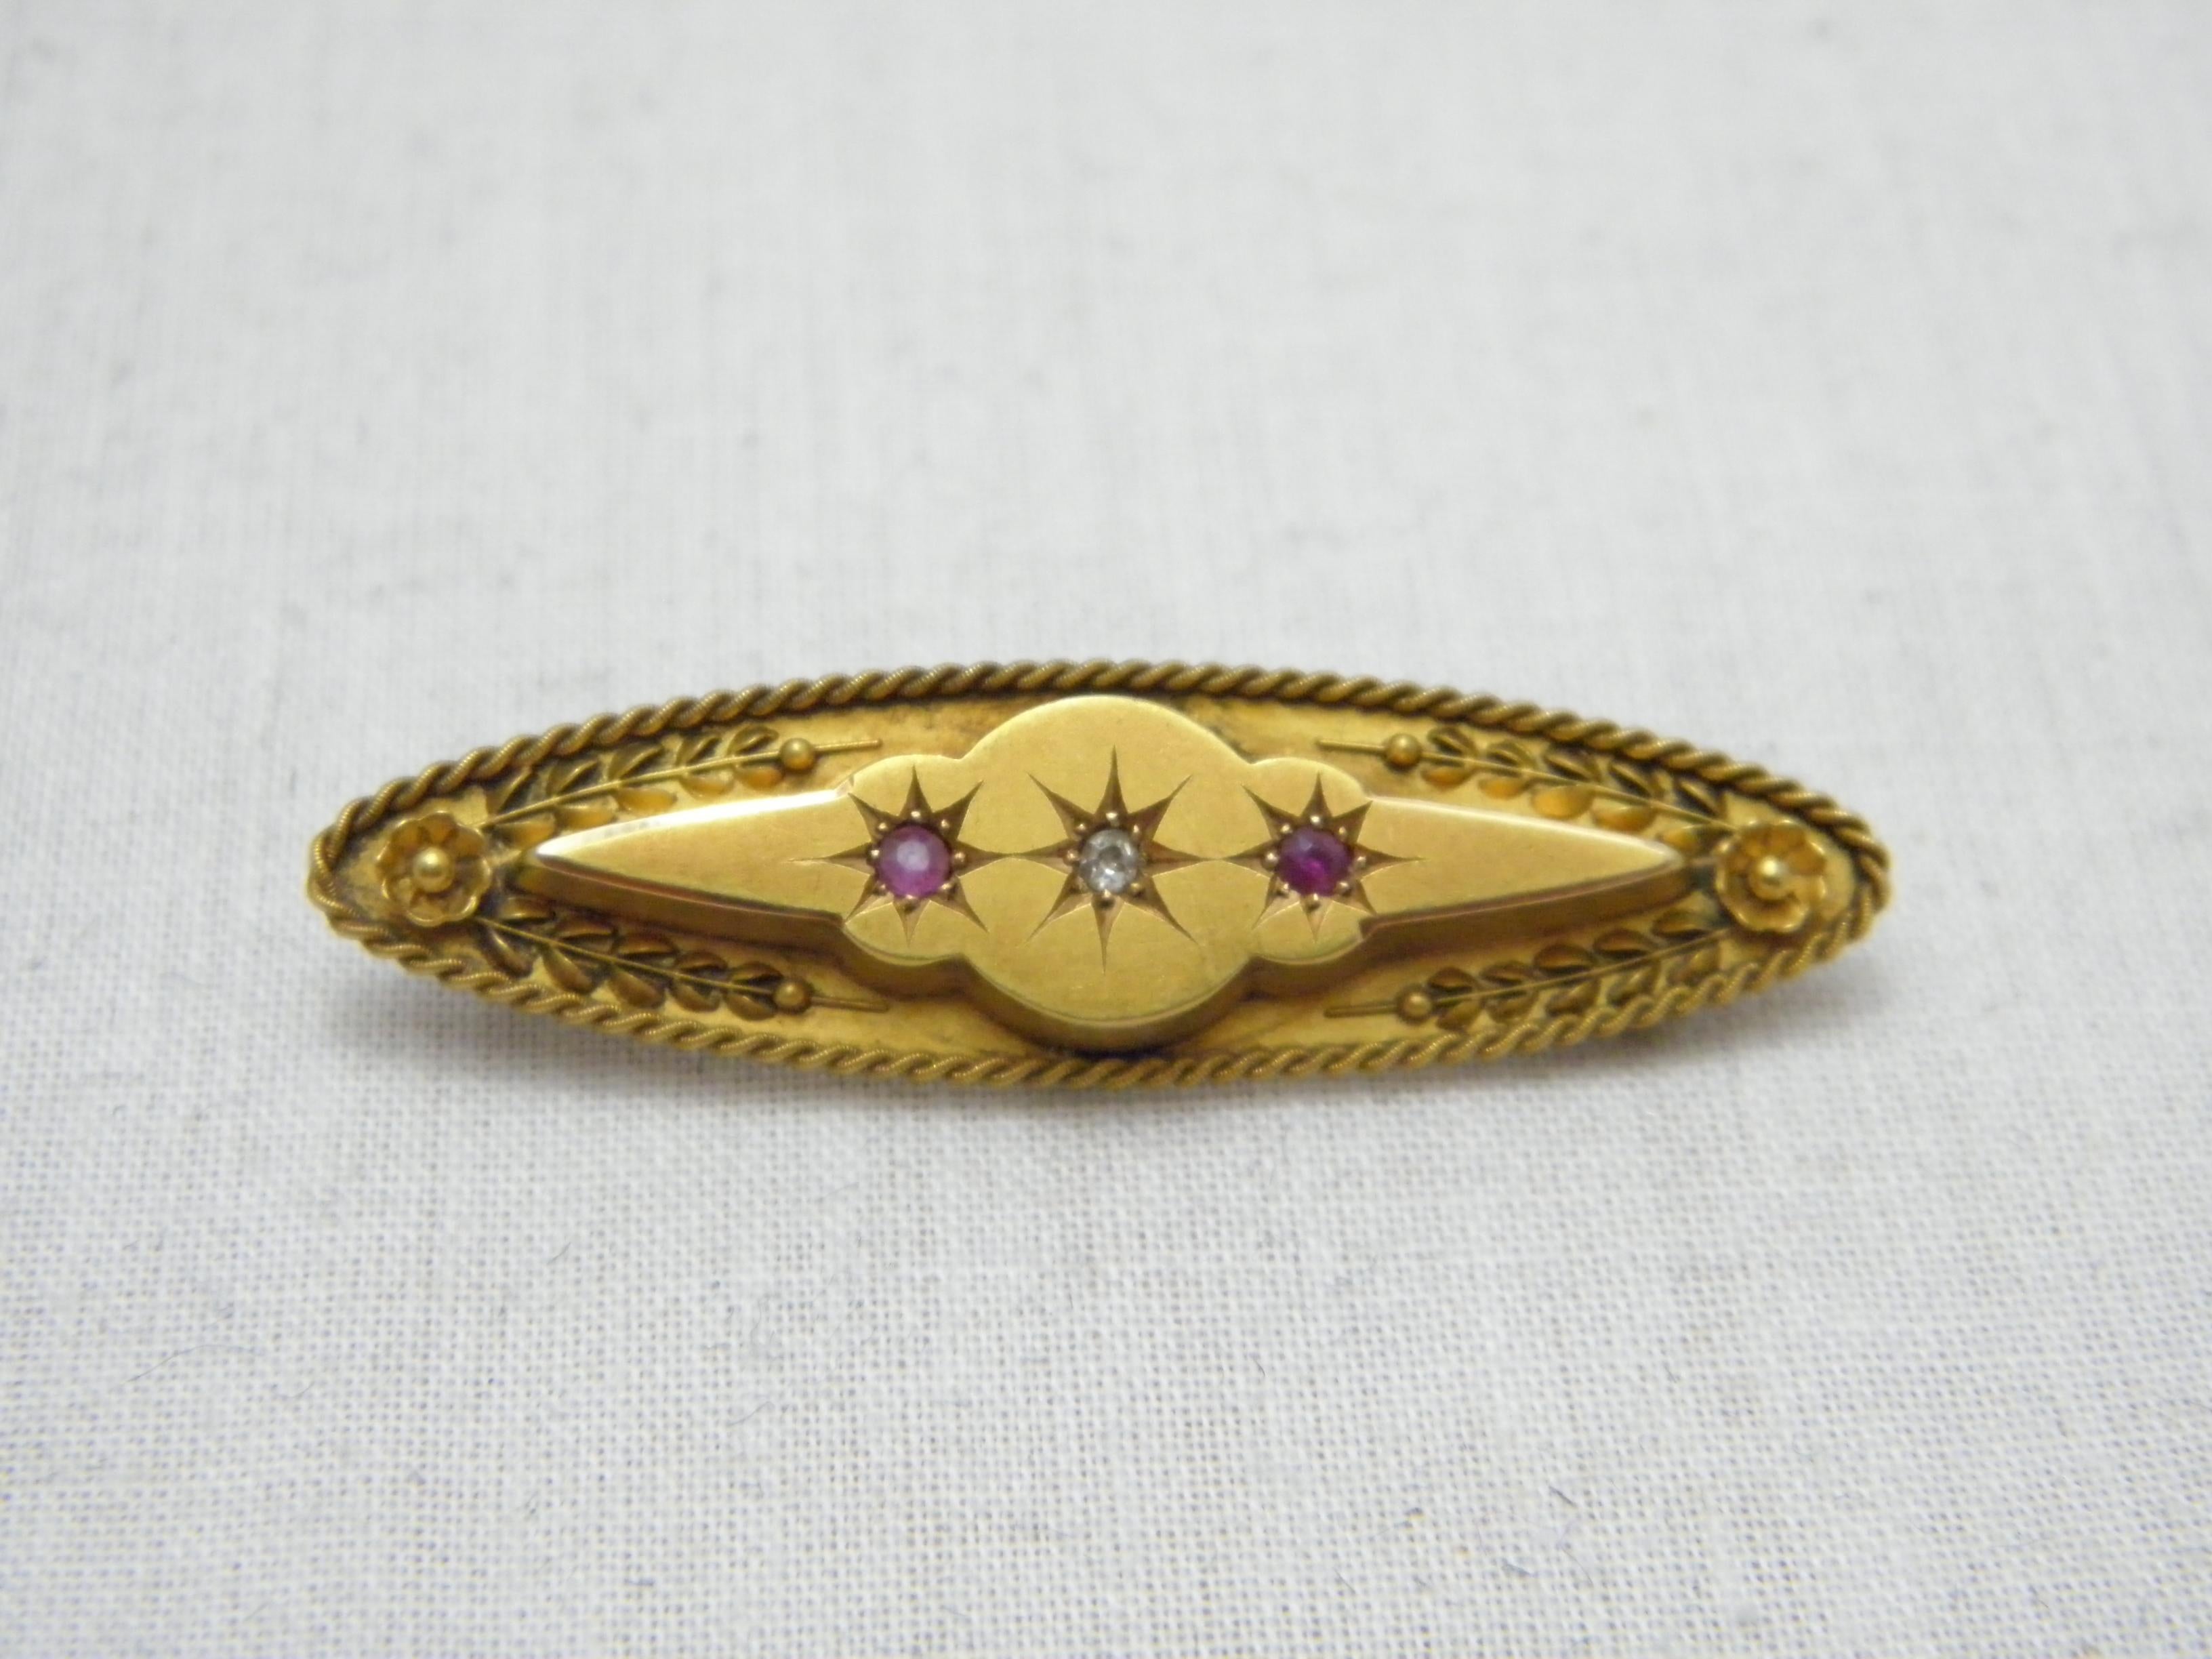 If you have landed on this page then you have an eye for beauty.

On offer is this gorgeous

15CT SOLID GOLD RUBY DIAMOND ROPE DETAILED BAR BROOCH

DETAILS
Material: 15ct (625/000) Solid Rosey Yellow Gold
Style: Victorian classic brooch / pin in the